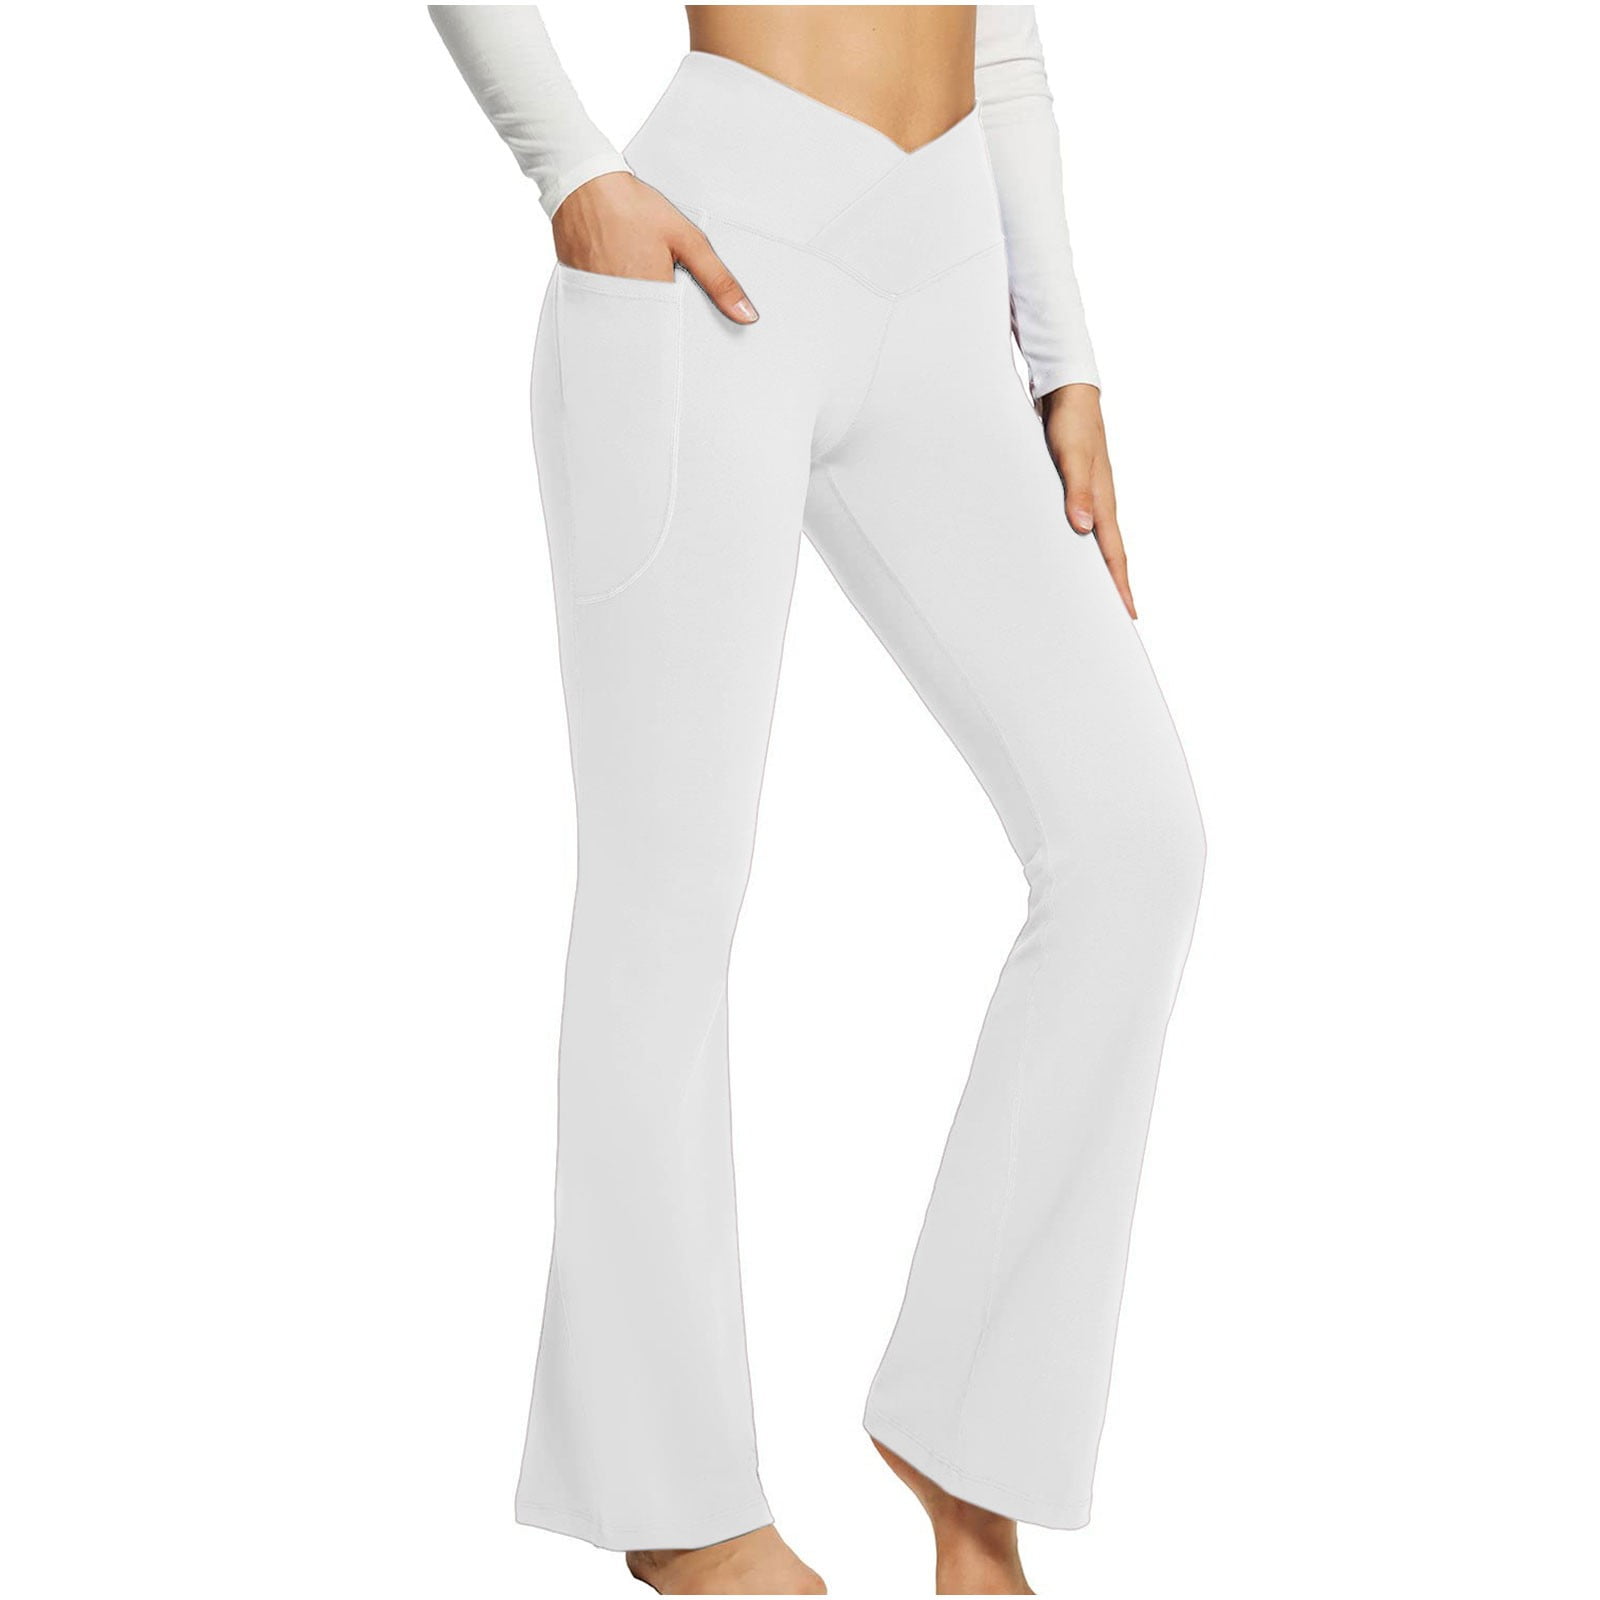 RQYYD Clearance Women's Crossover High Waisted Bootcut Yoga Pants